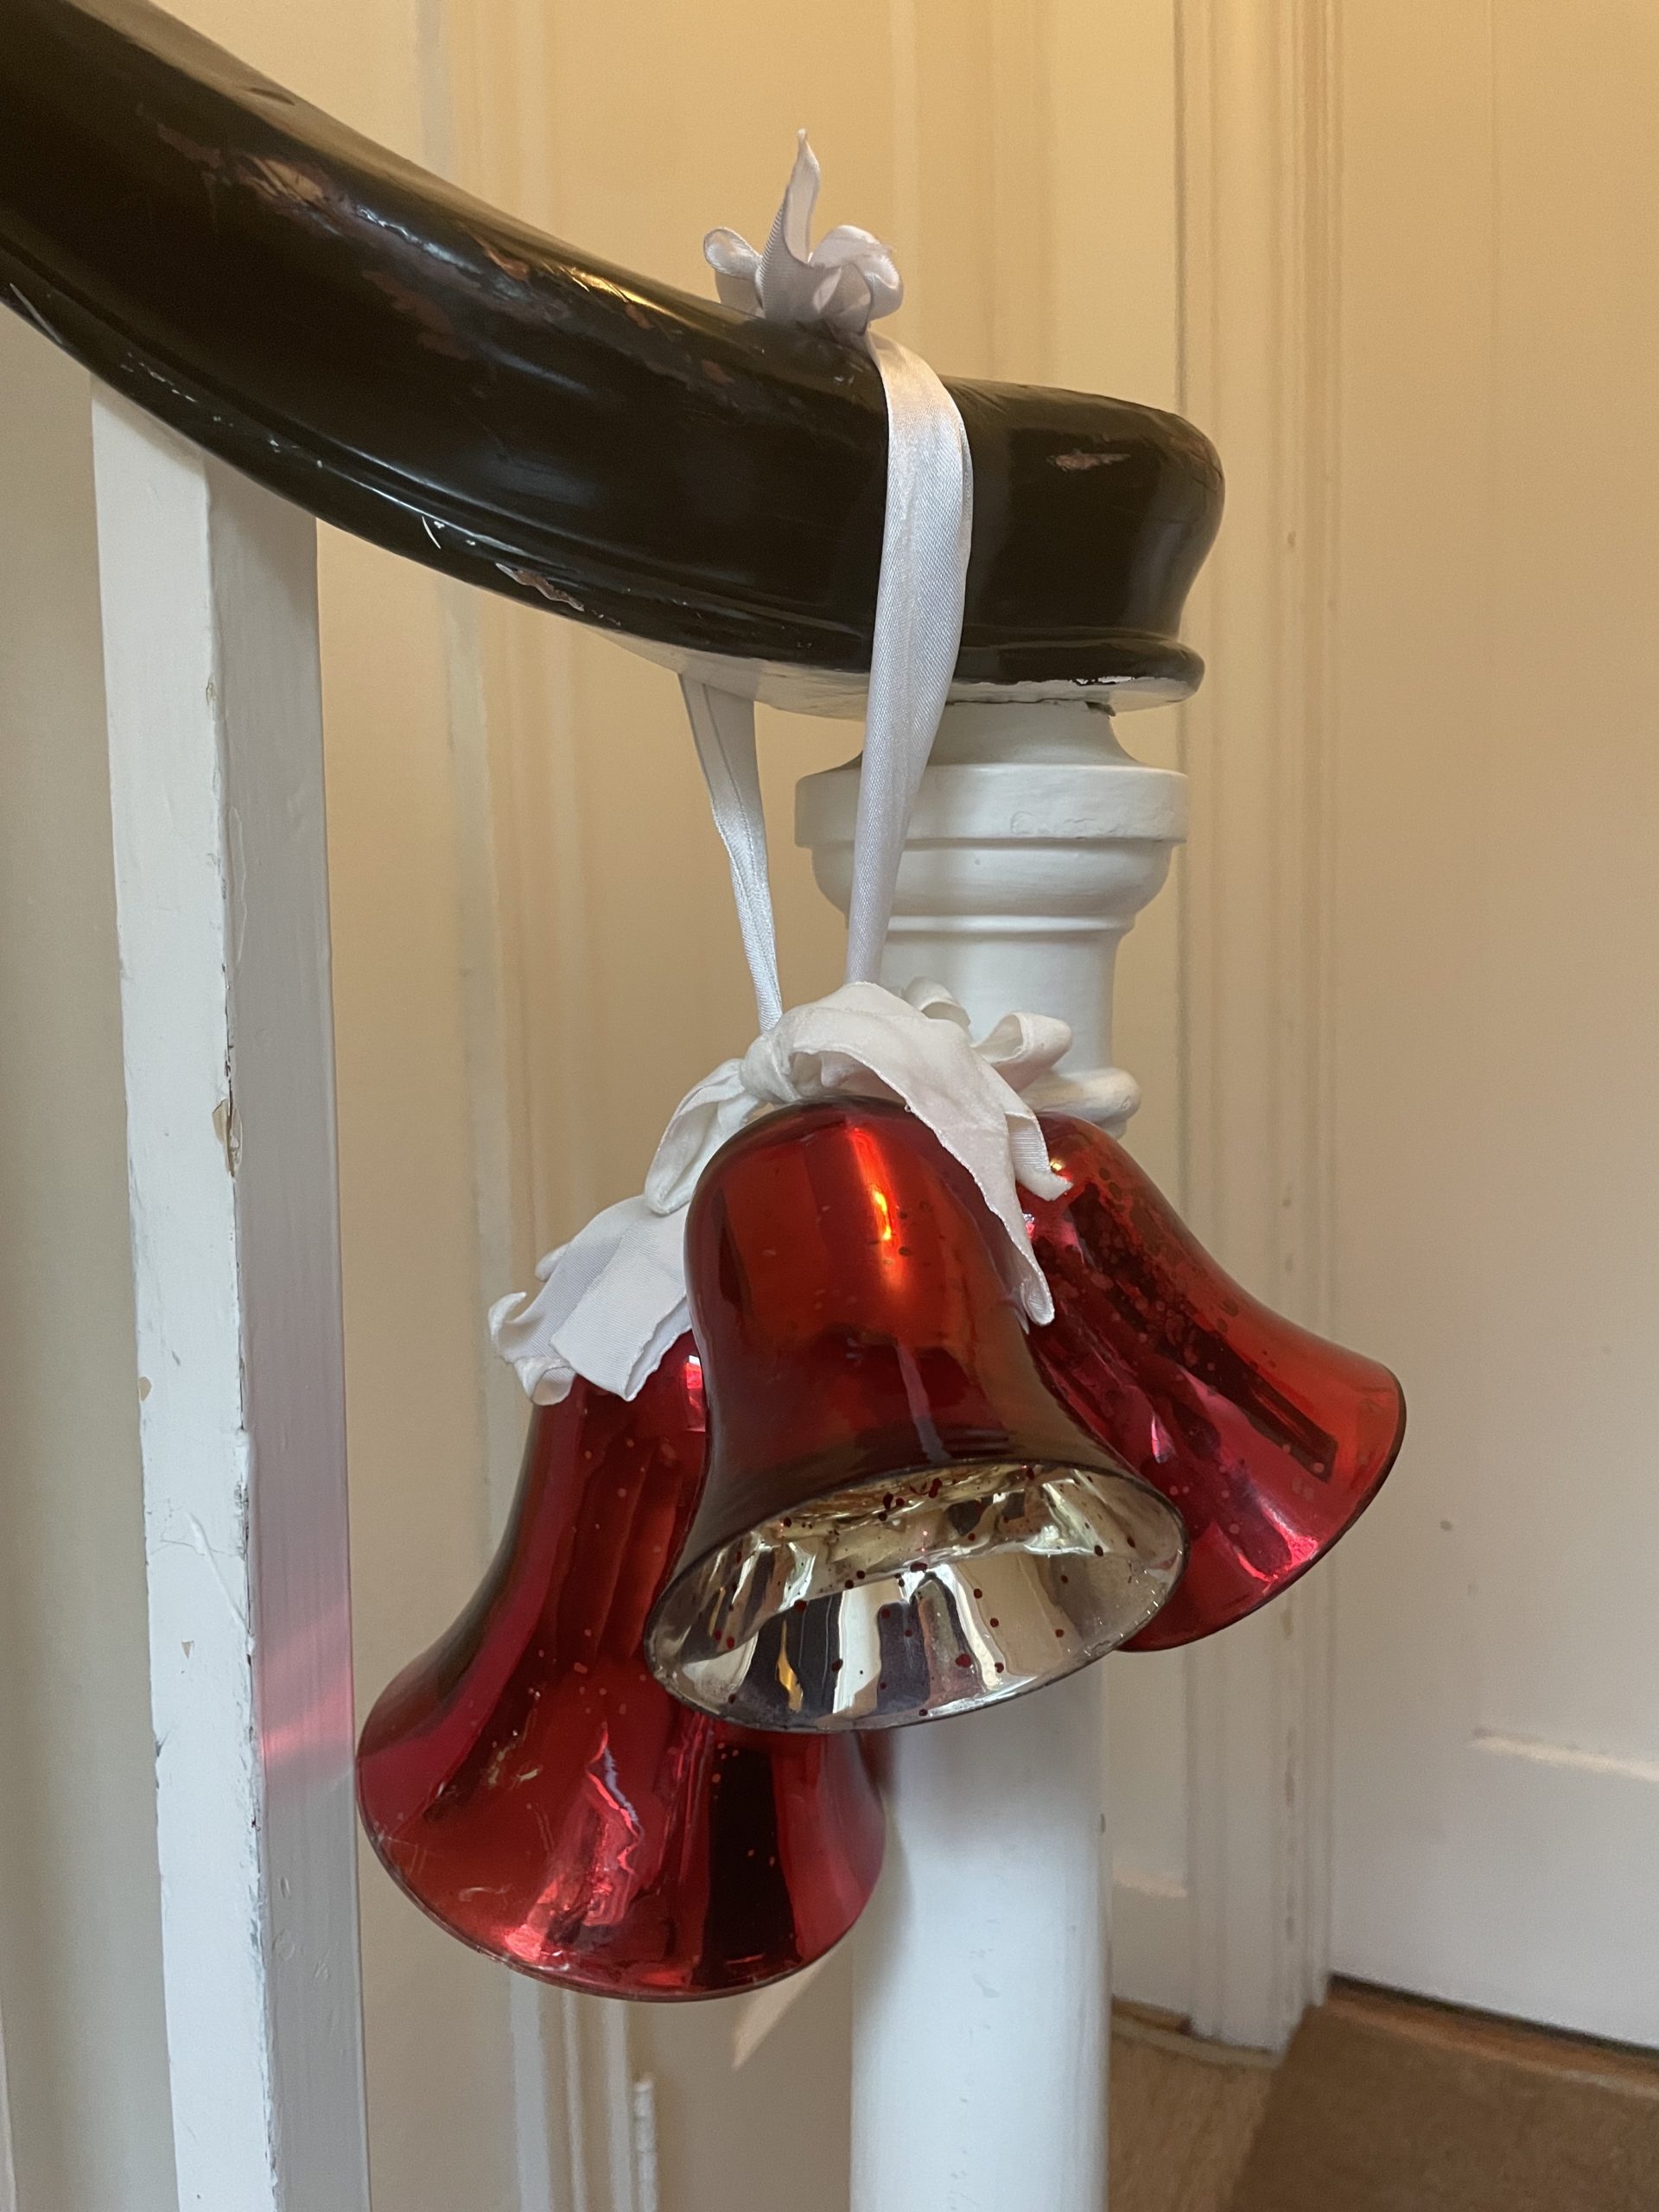 Bells from Homegoods tied with gift ribbon on staircase